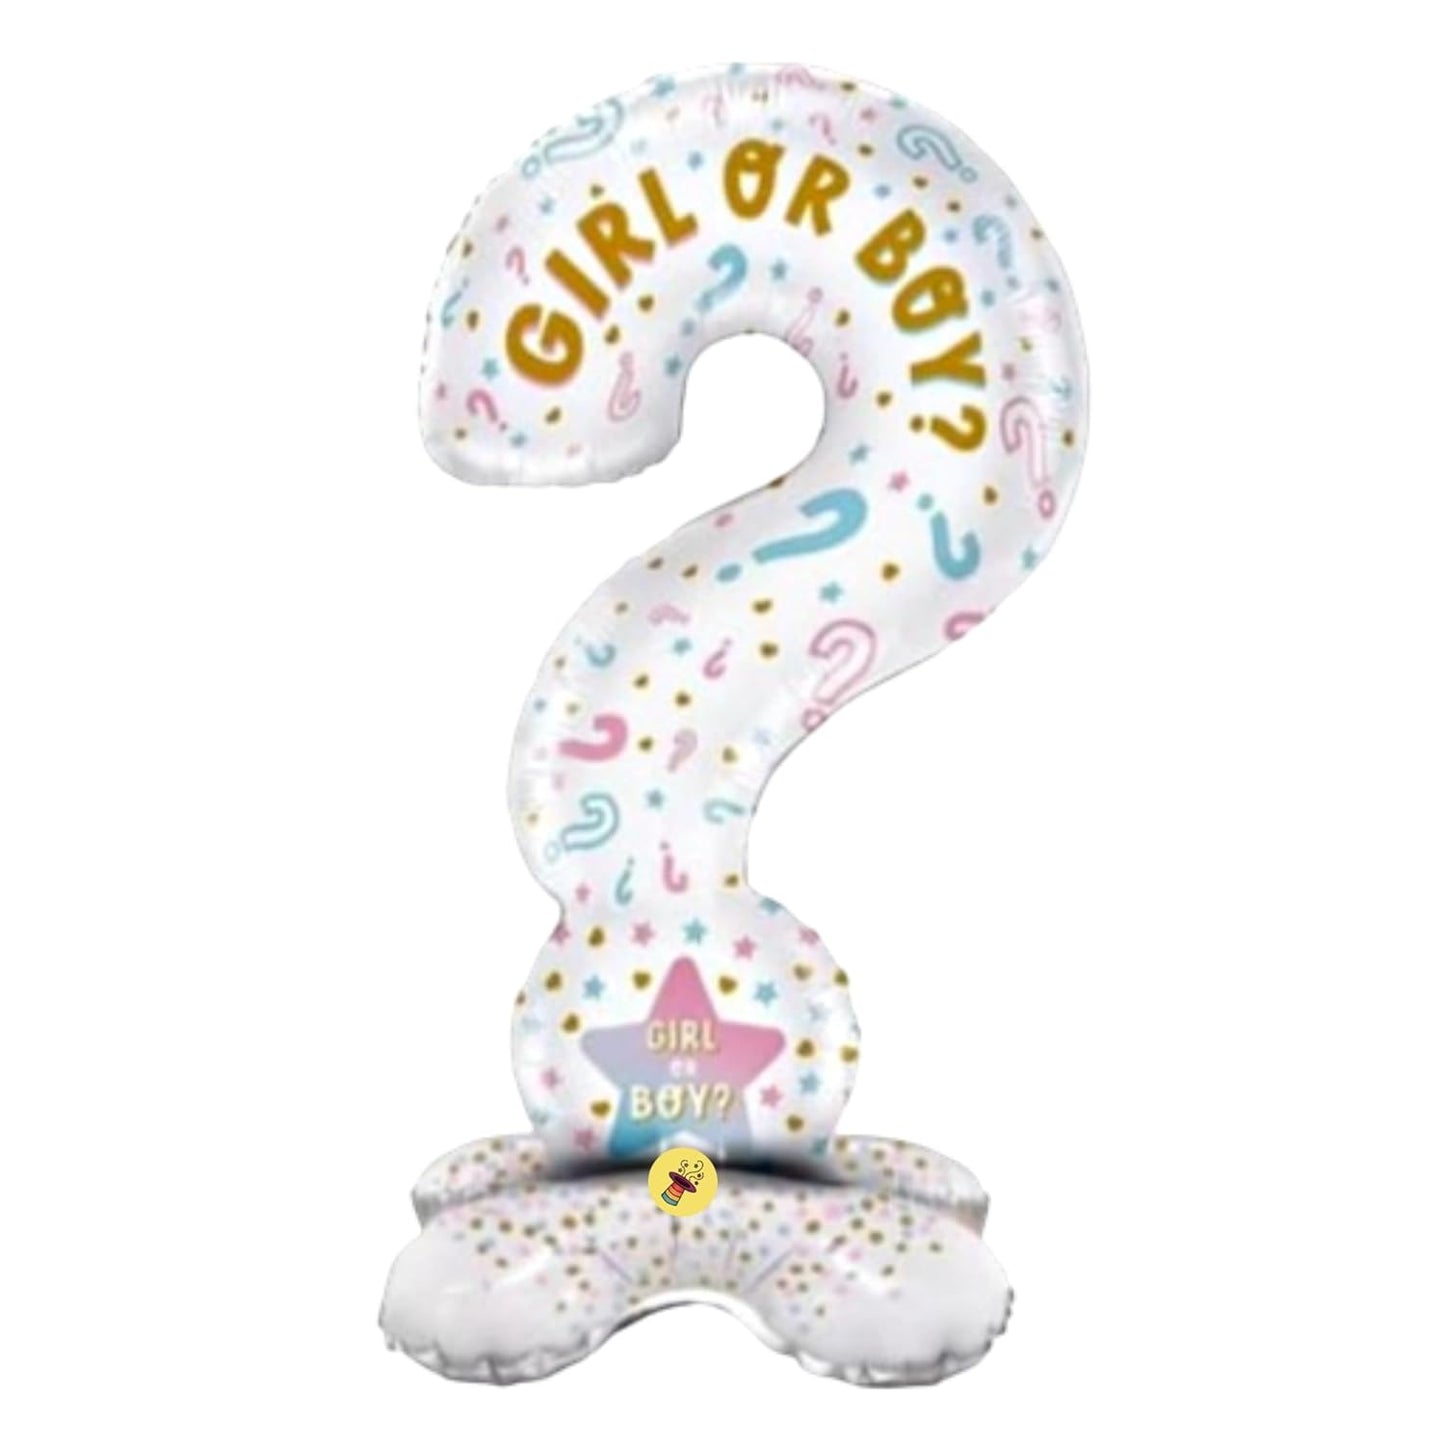 3.6 Feet Baby Shower Question Mark Shape Standee Foil Balloon for Eye-Catching Playful Decorative Baby Shower Mom To Be Parties